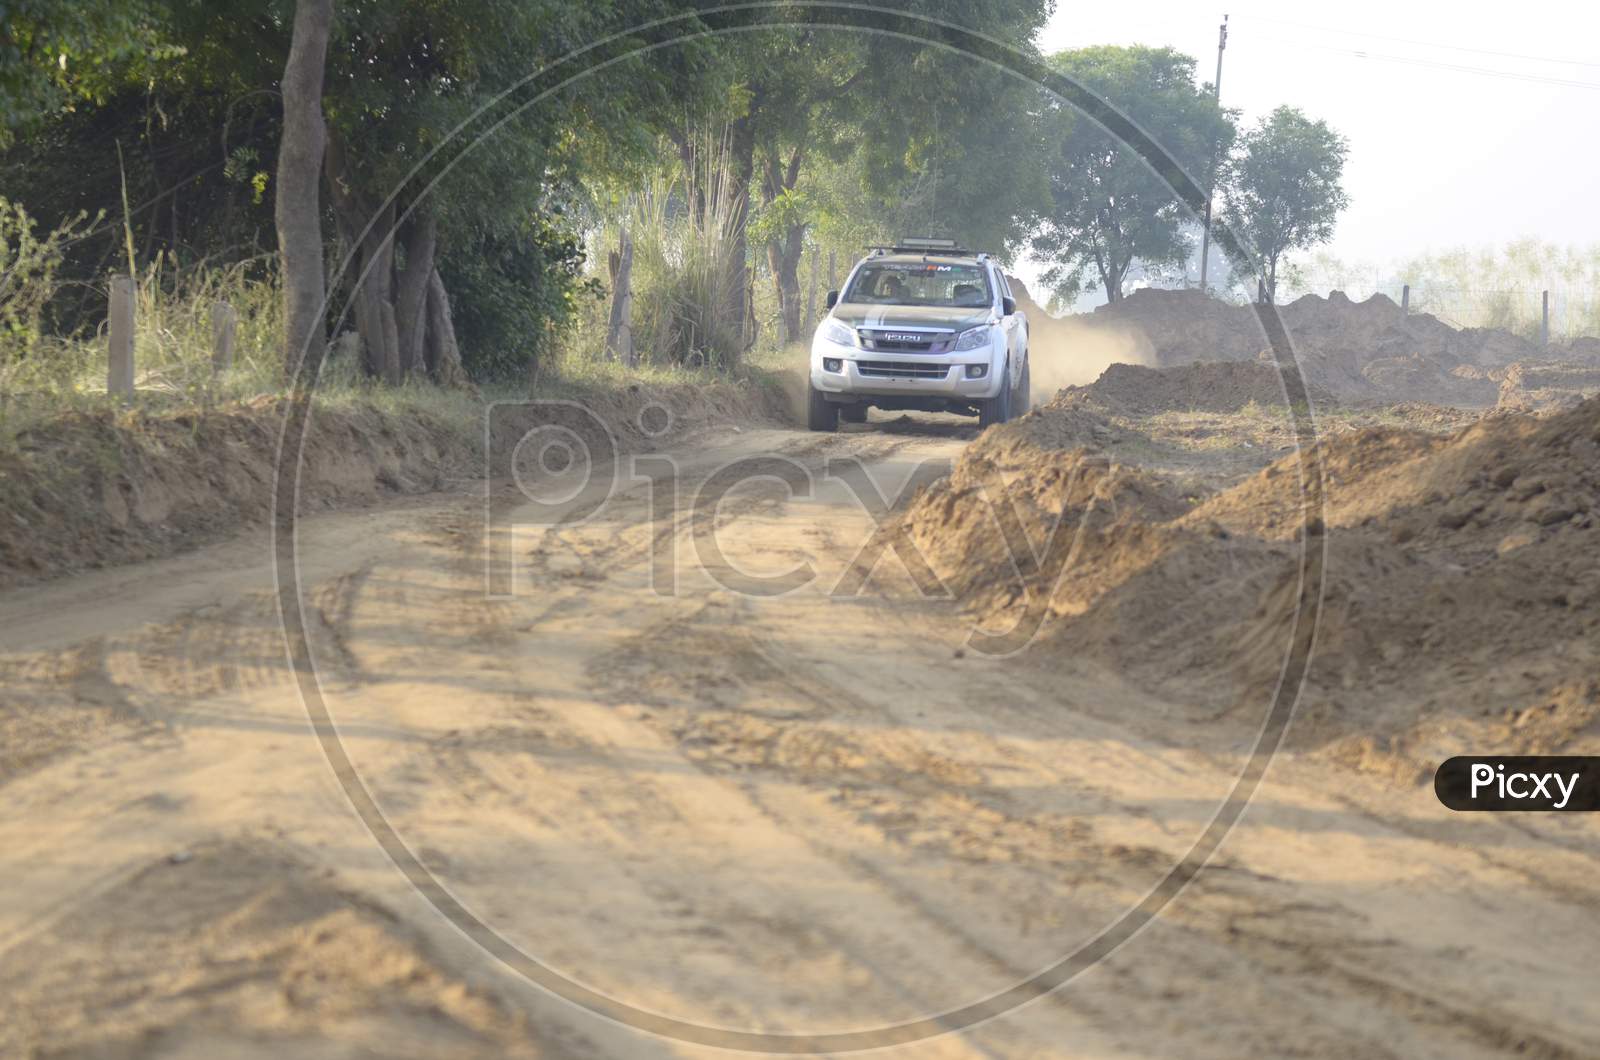 A Dirt road during the rally race